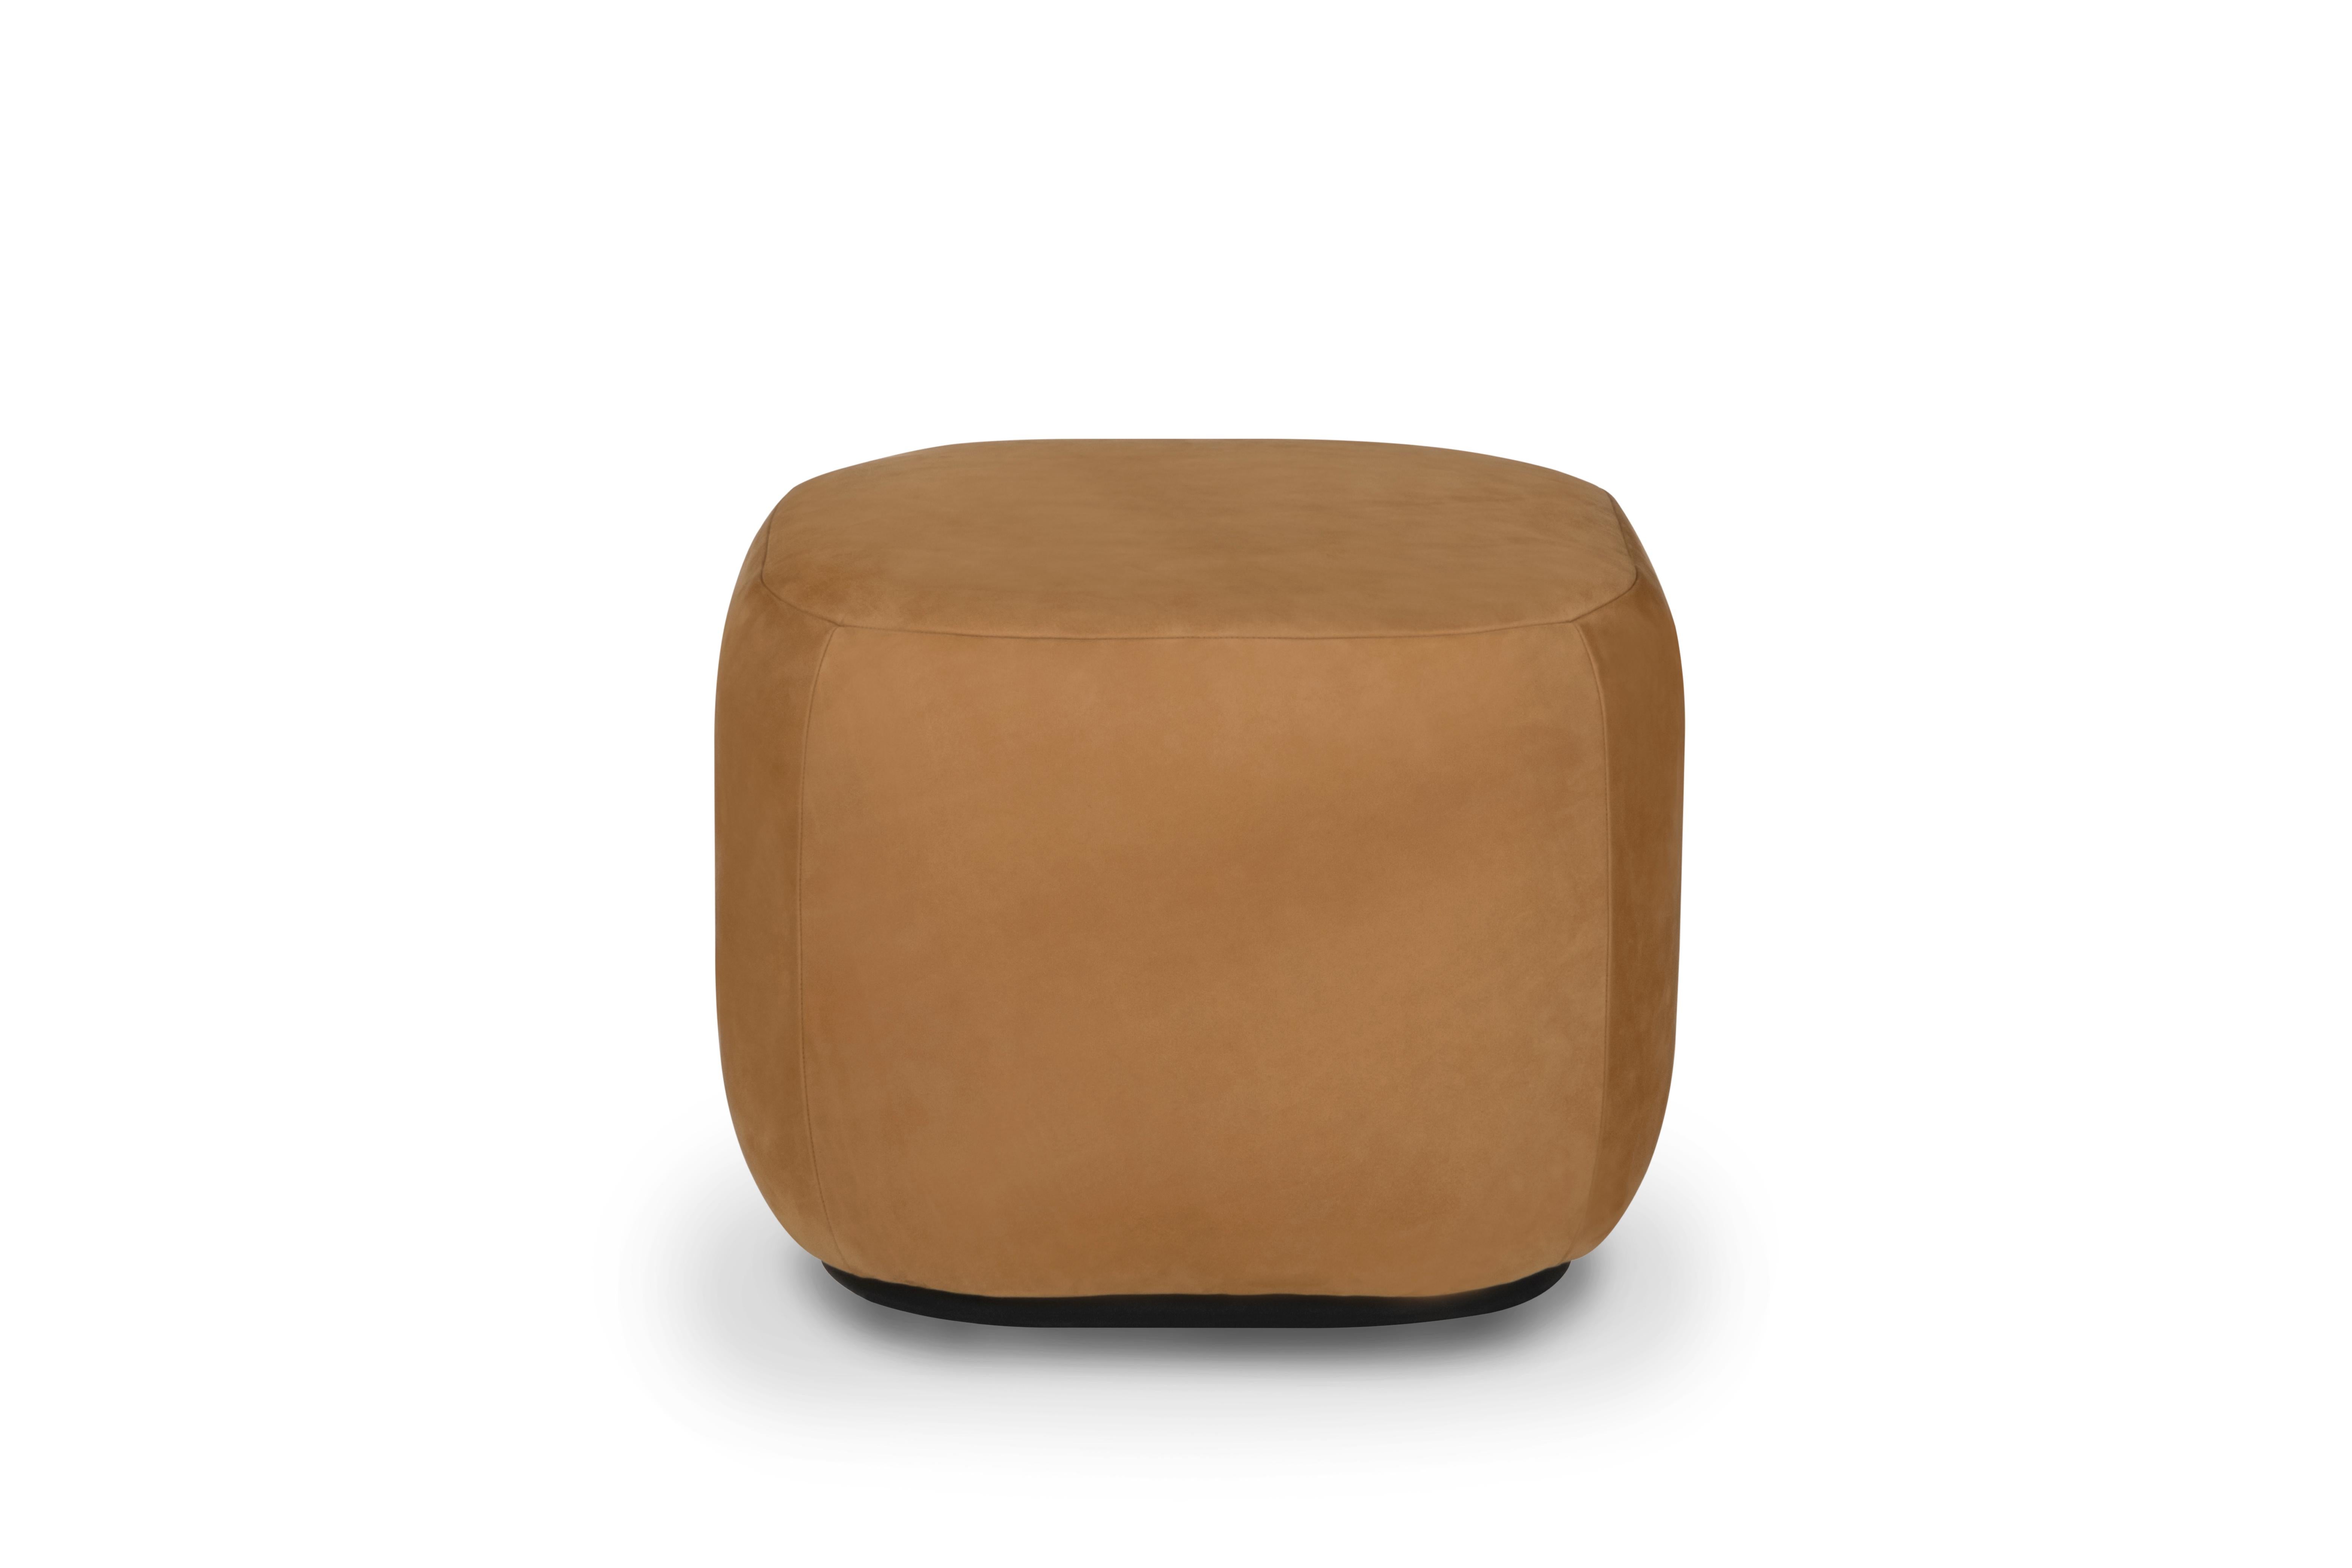 Capri Pouf Ottoman, Contemporary Collection, Handcrafted in Portugal - Europe by GF Contemporary.

A comfy ottoman with a luxurious touch. Upholstered in caramel in Italian nubuck velvet leather. Destined to beautify in any of its finishes, this